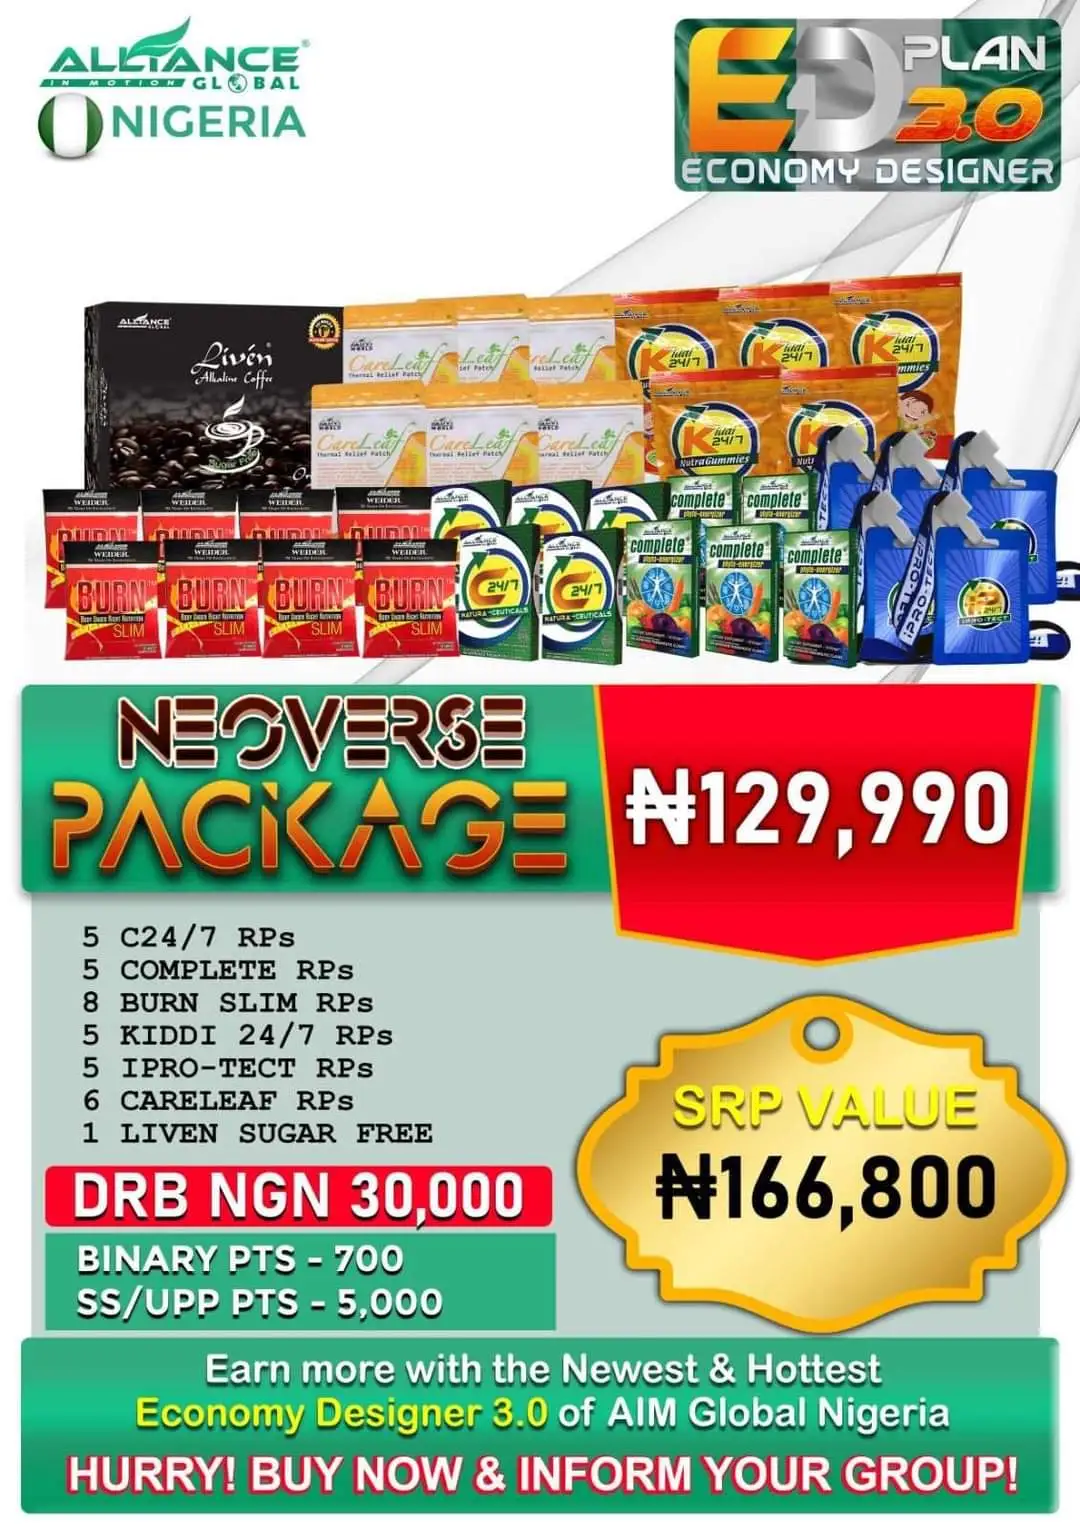 Neoverse Package